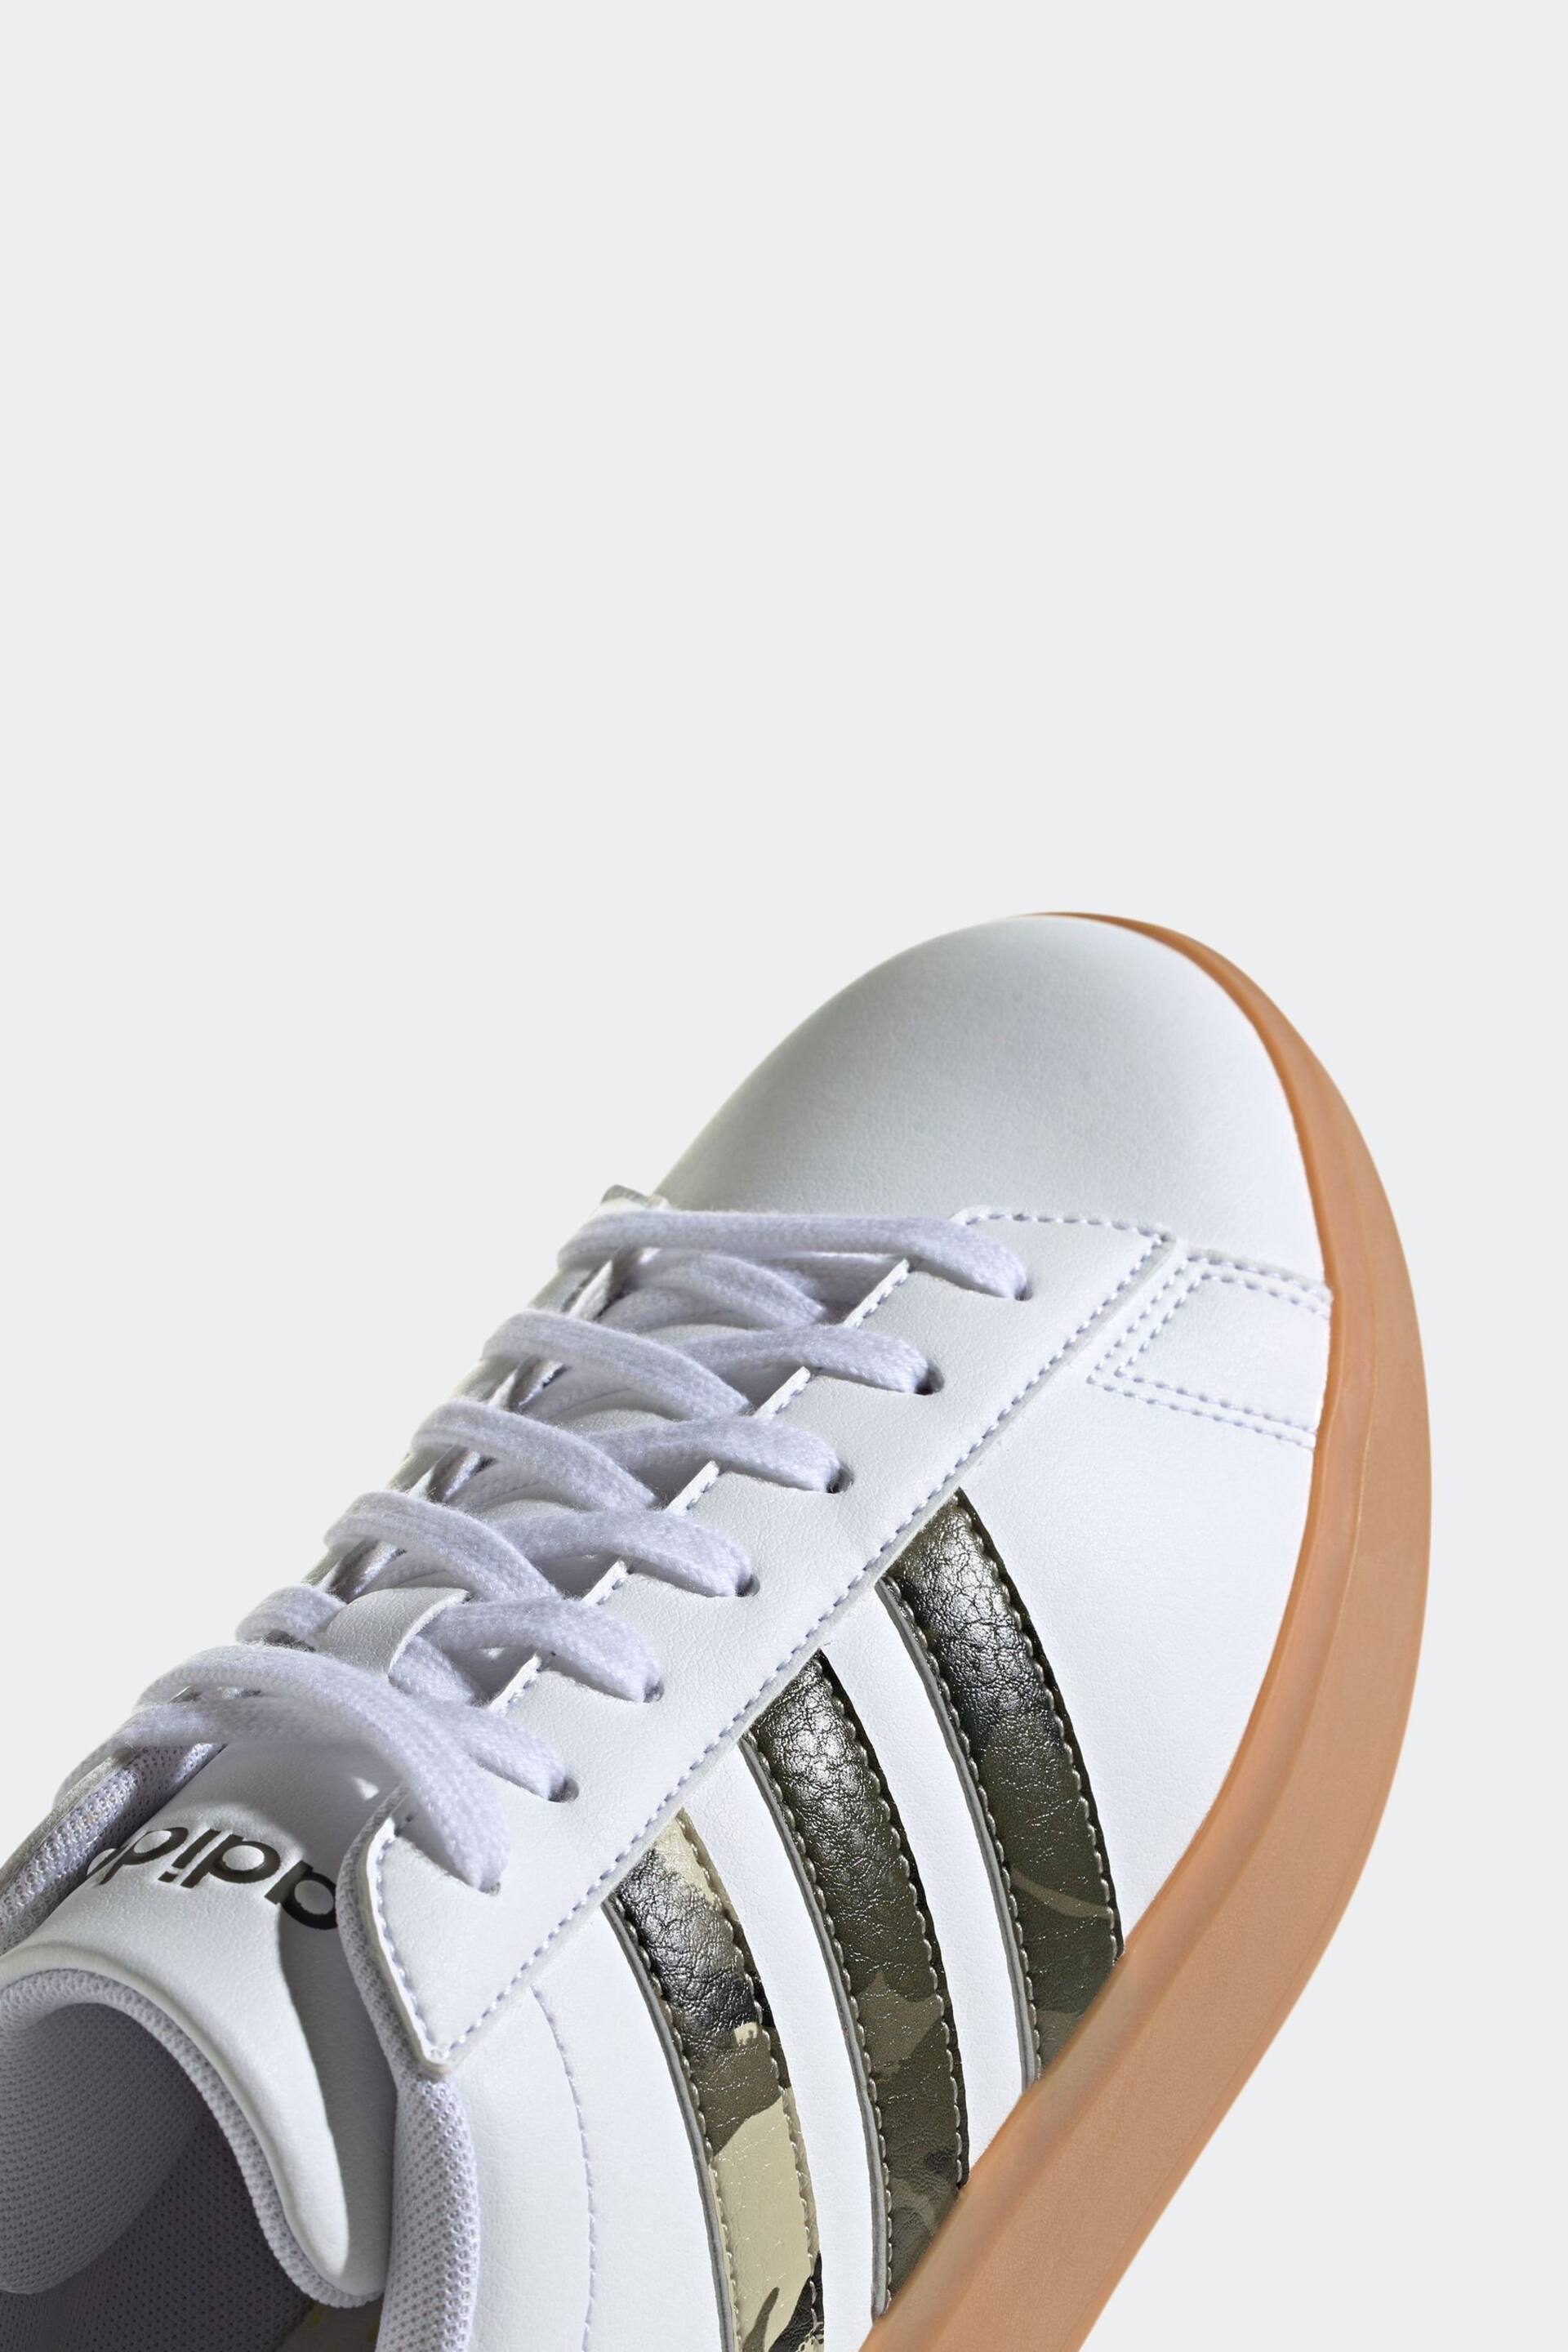 adidas Off White Sportswear Grand Court 2.0 Trainers - Image 8 of 9